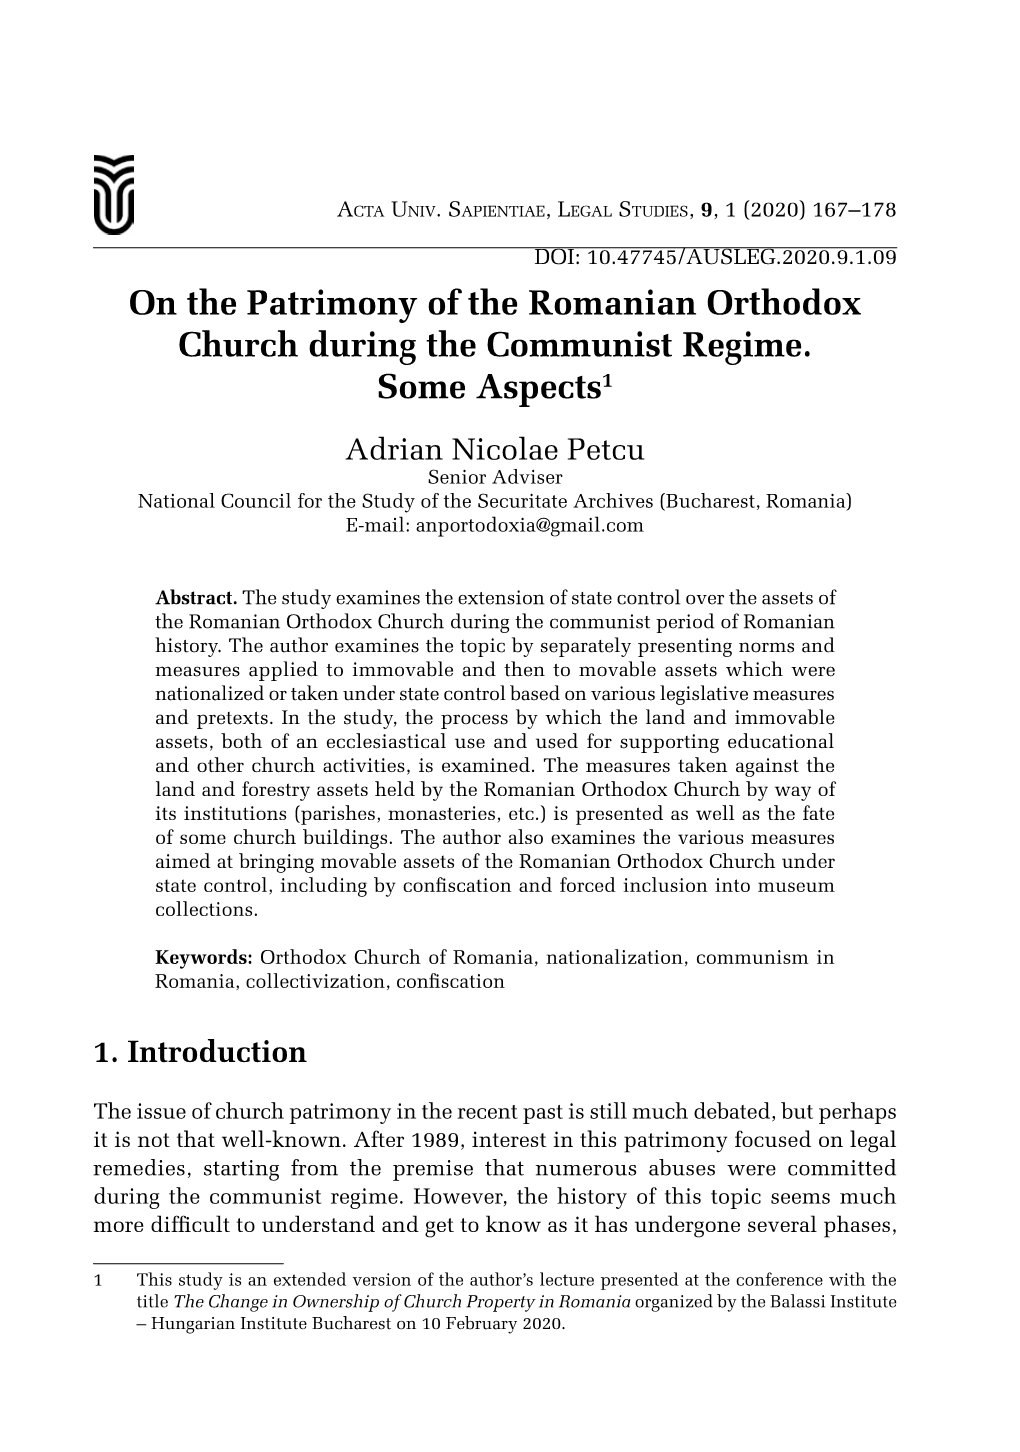 On the Patrimony of the Romanian Orthodox Church During the Communist Regime. Some Aspects1